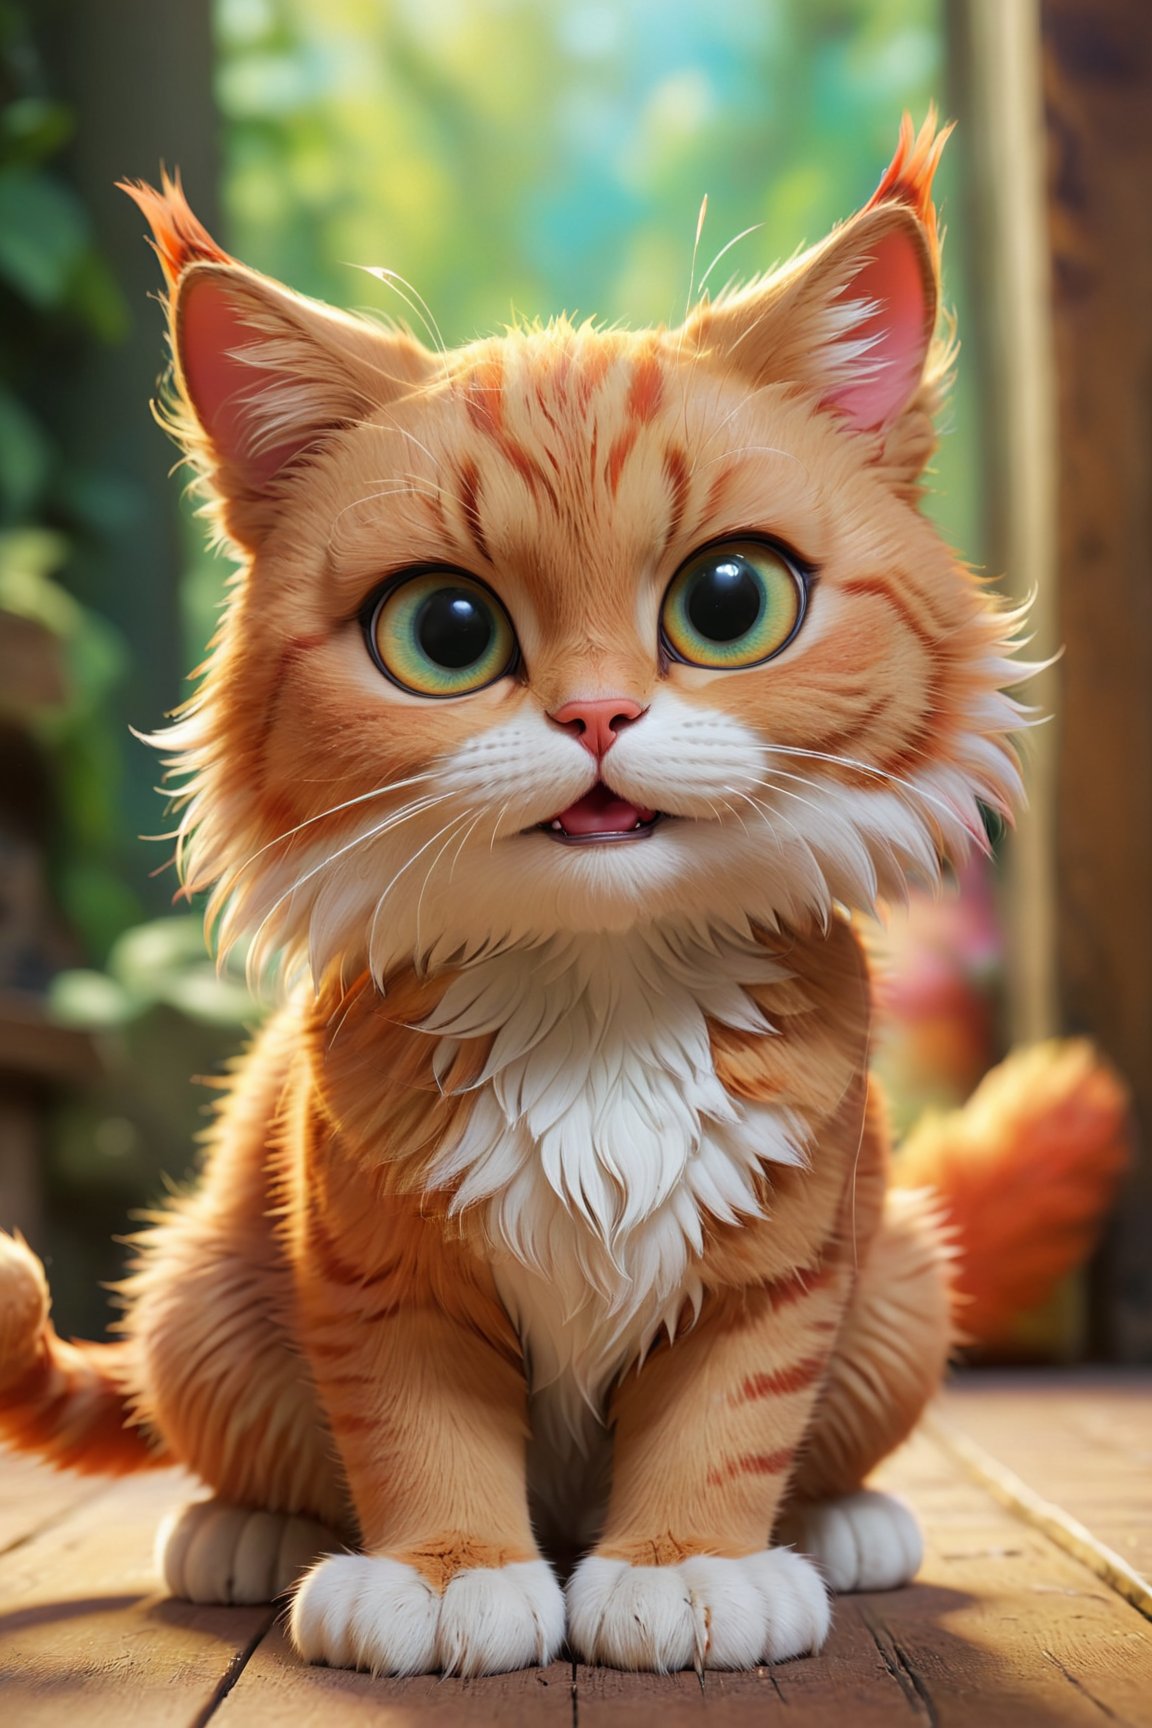 (best quality,4k,8k,highres,masterpiece:1.2),ultra-detailed,(realistic,photorealistic,photo-realistic:1.37),cute,colorful,3D,cartoon,portraits,cat,portrait,playful expression,adorable eyes,and curious expression,lively background,whimsical atmosphere,vibrant colors,soft fur texture,big round eyes,delicate whiskers,sharp focus,expressive features,playful posing,cat ears,and paws in the foreground,eye-catching details,skillful shading,striking visual impact,professional composition,artistic charm,perfect lighting,bright and vivid hues,artistic interpretation of a cat,immersive 3D effect,masterfully crafted,eye-catching composition,unique cat character,appealing cuteness,meticulous attention to detail,stylized illustration,imaginative artwork,captivating playfulness,colorful and vibrant artwork,artistic flair with a touch of whimsy